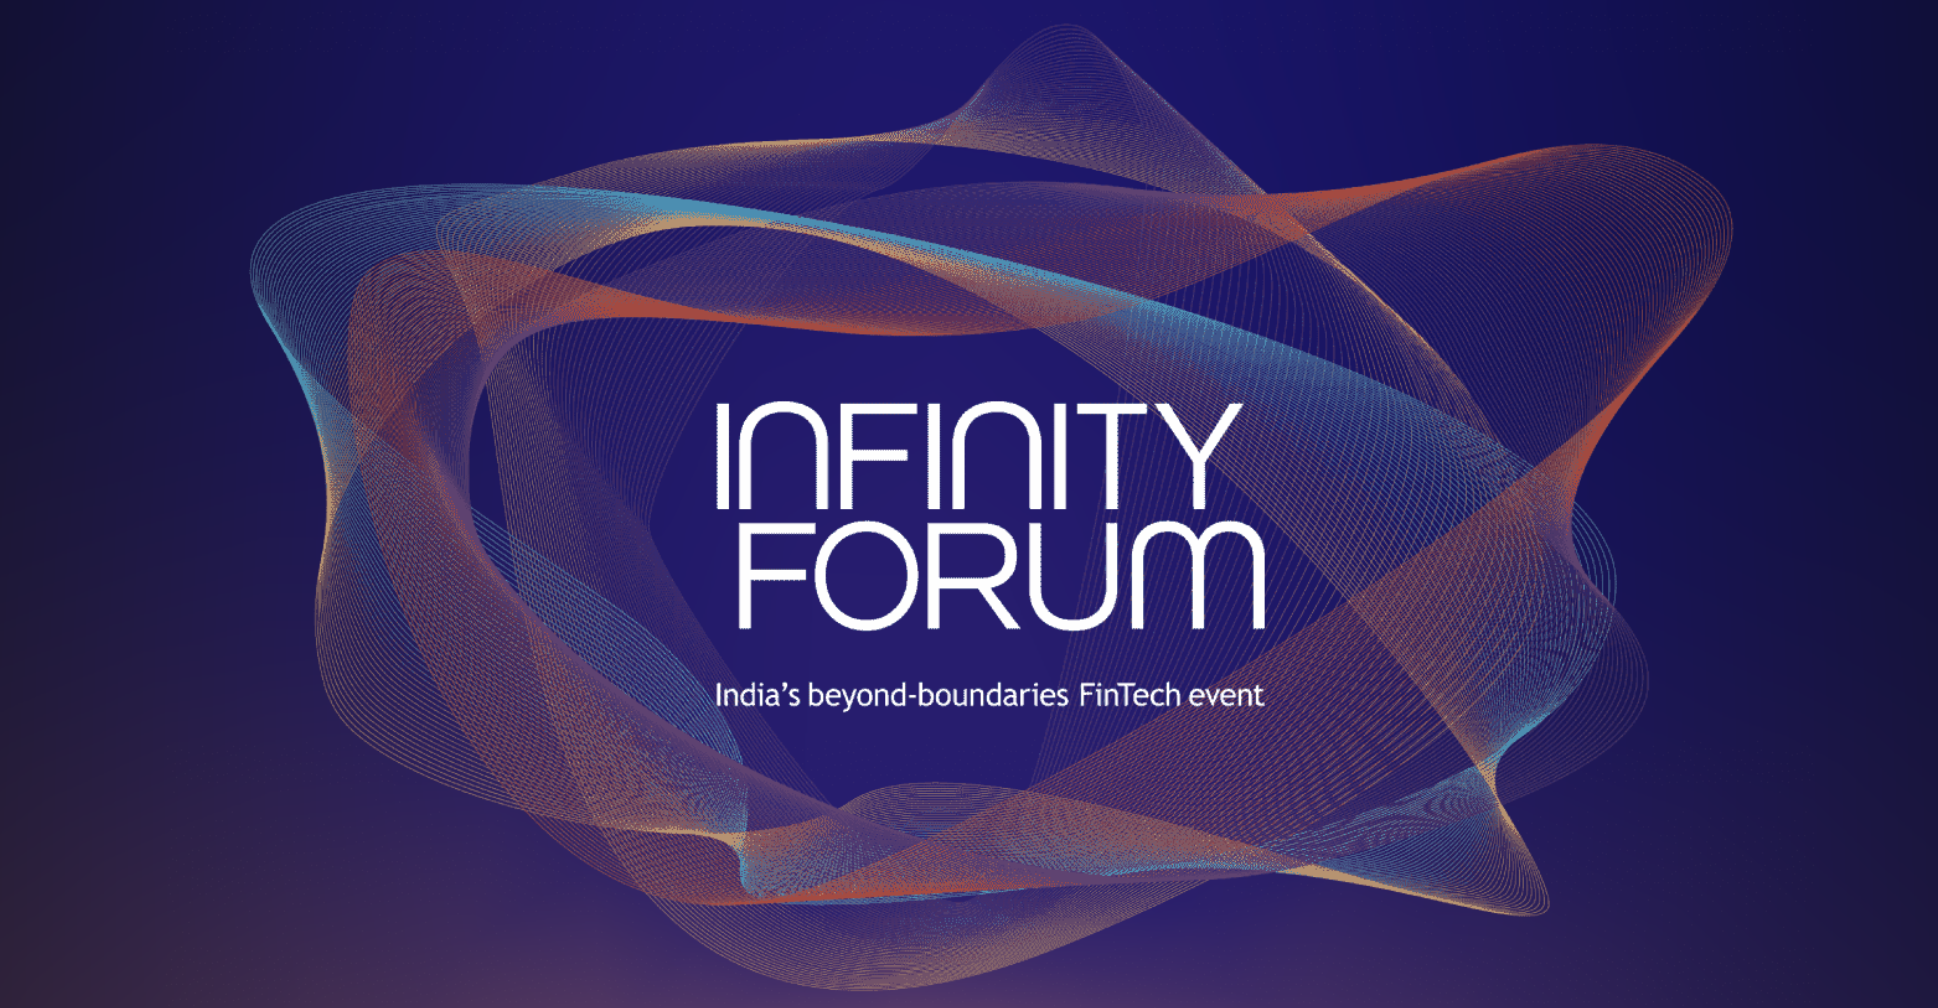 India's infinity forum launch by PM